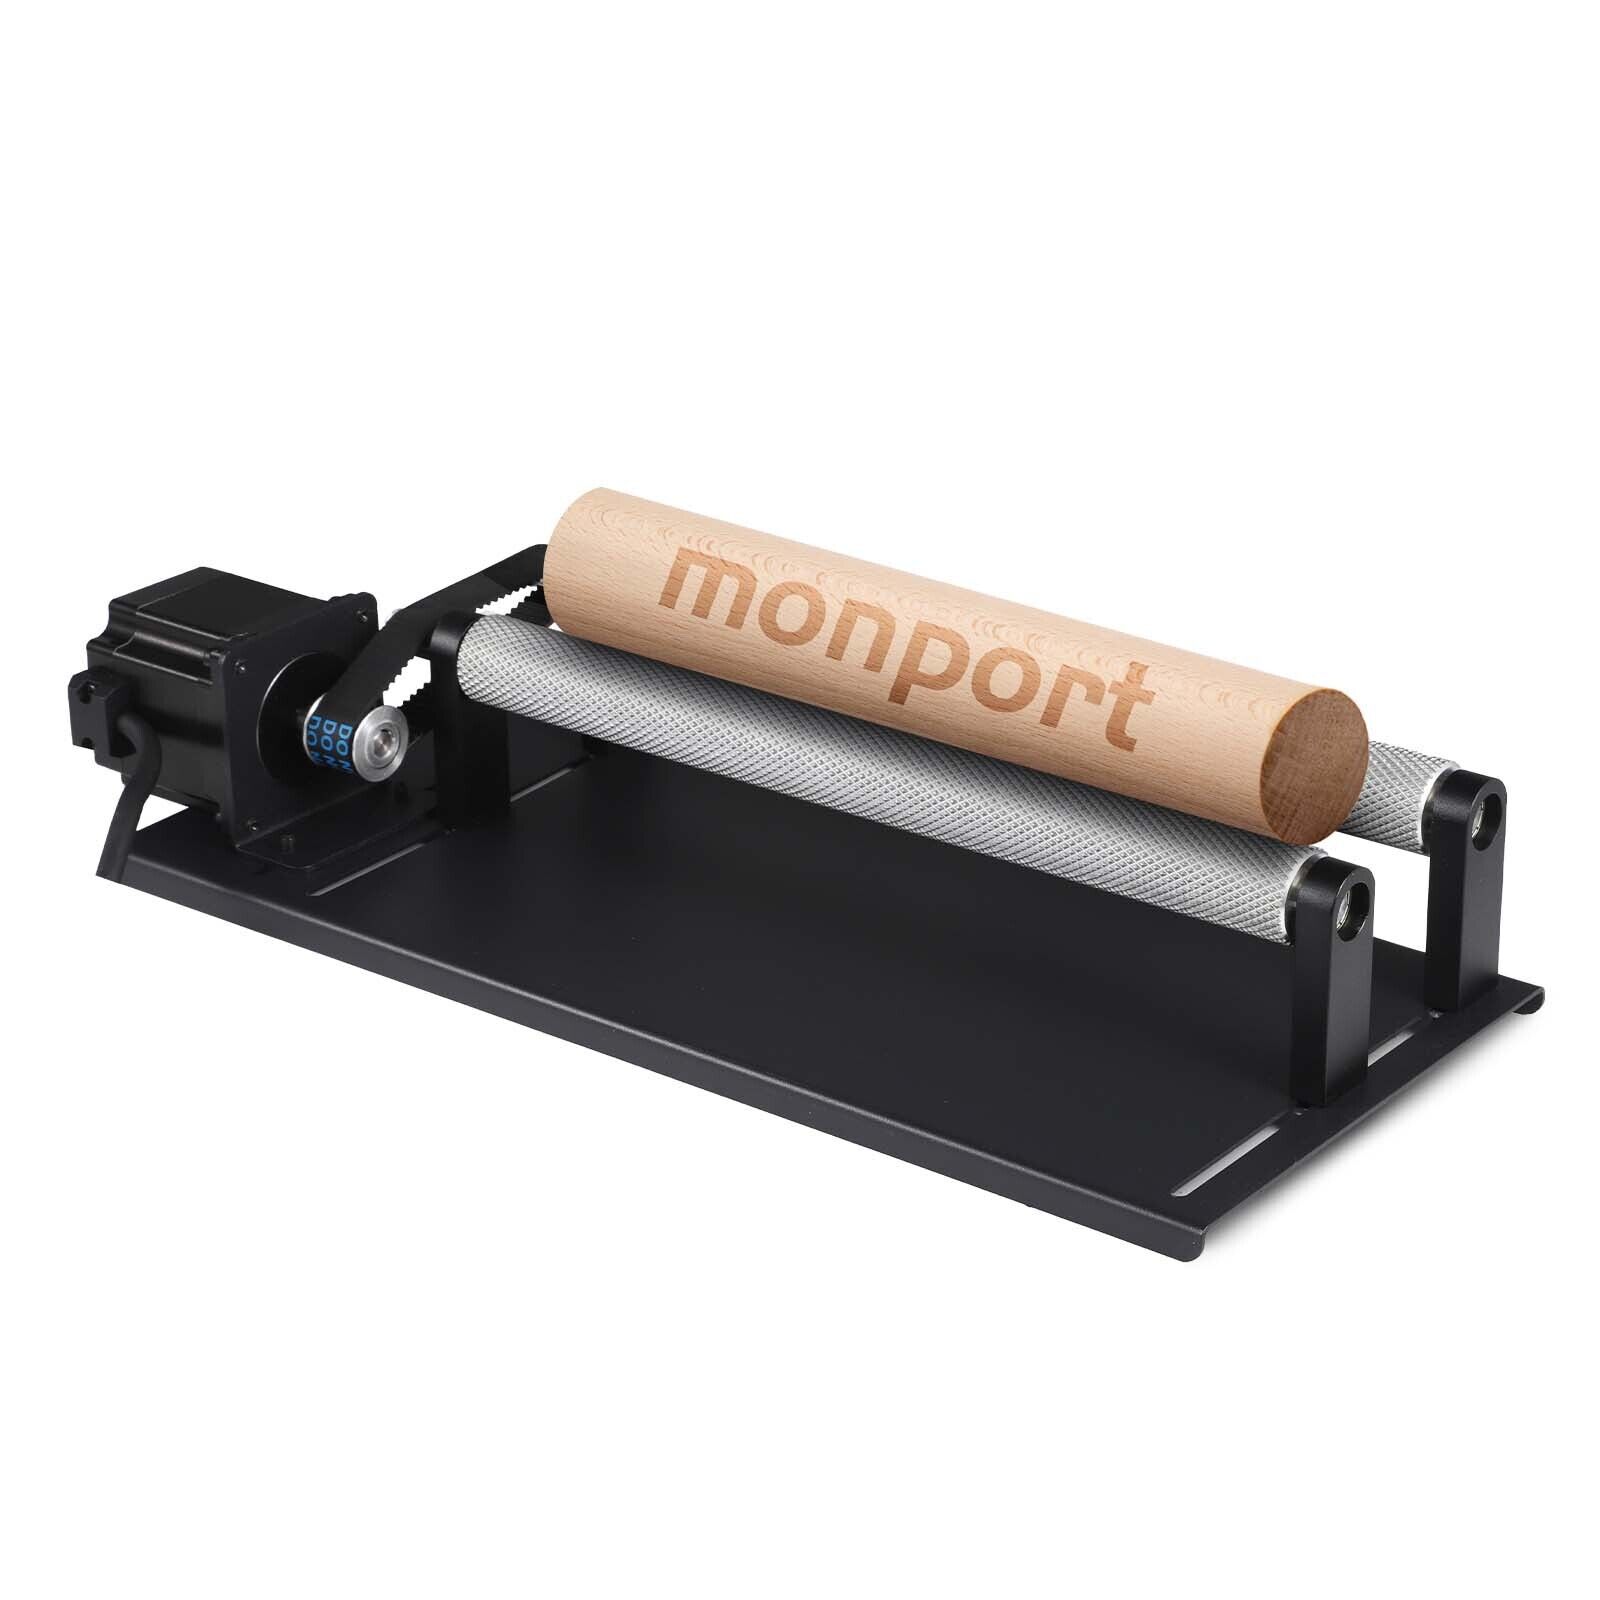 Monport Laser Rotary Roller Axis 360° for 60w-150W CO2 Laser Engraver Machine US